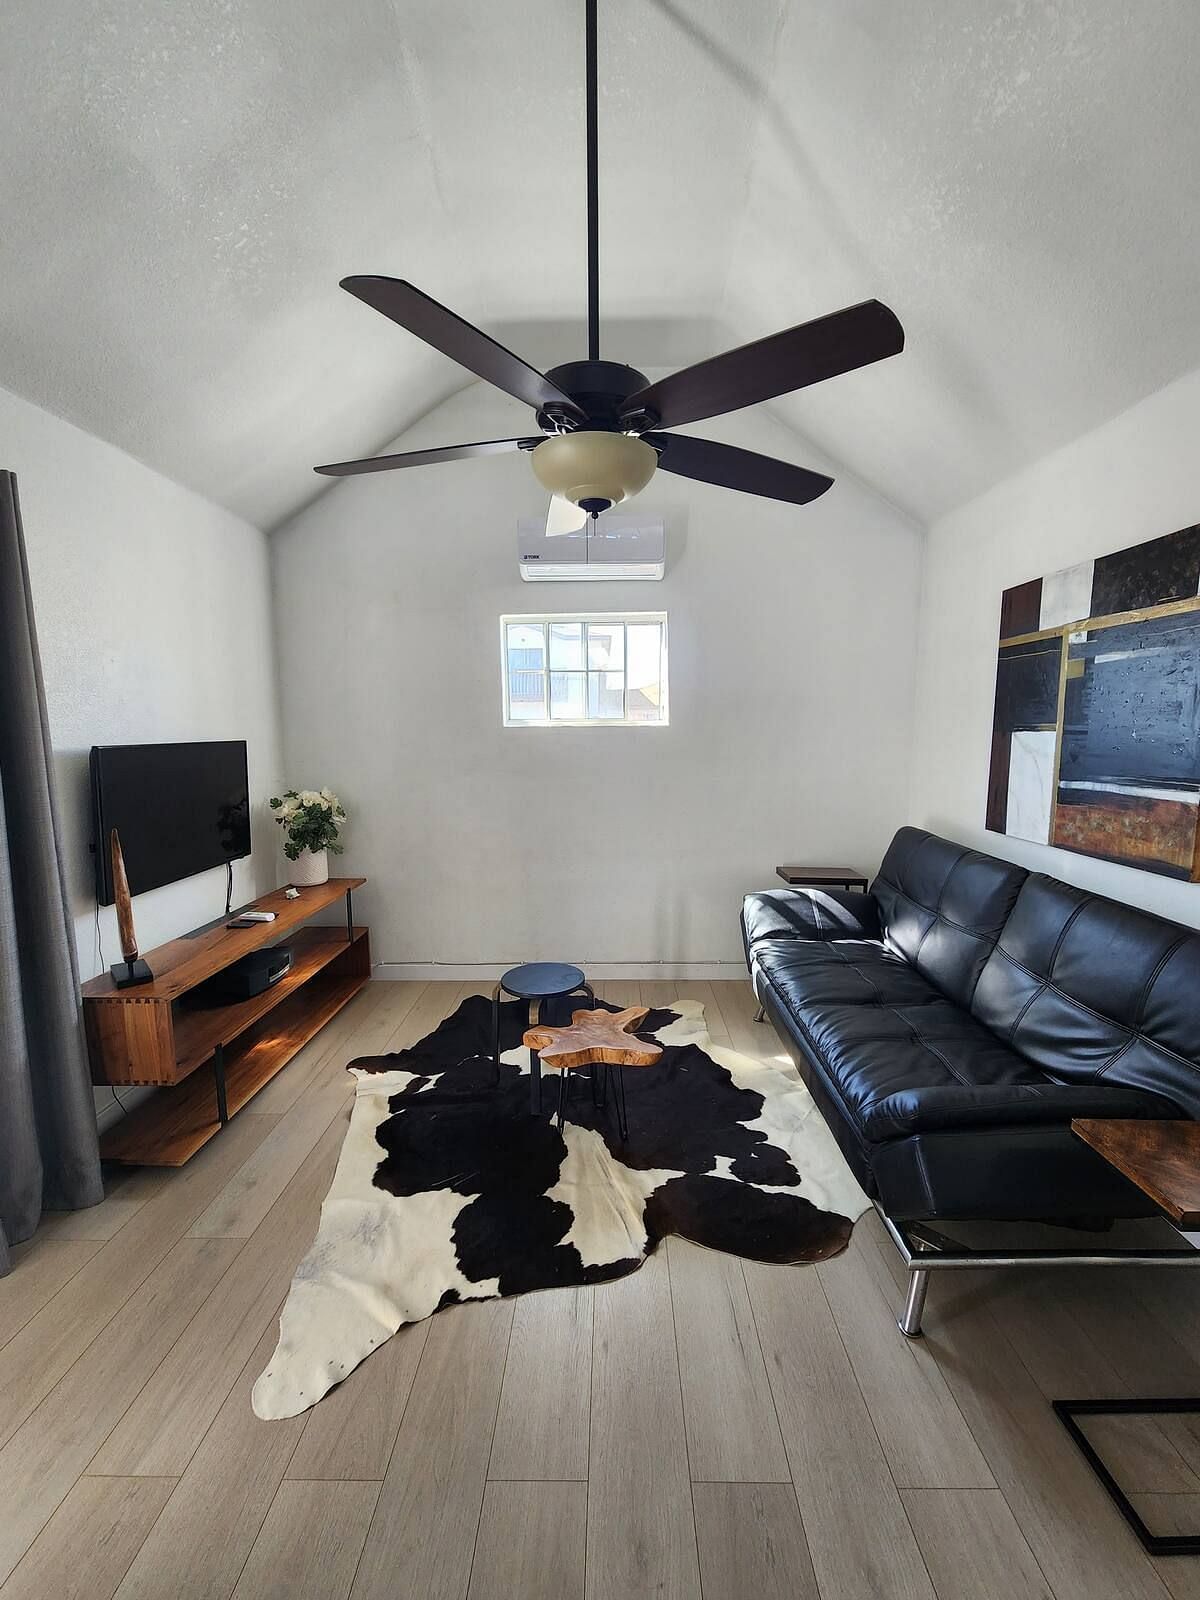 JWguest House at Imperial Beach, California | Tiny home in beach town | Jwbnb no brobnb 4